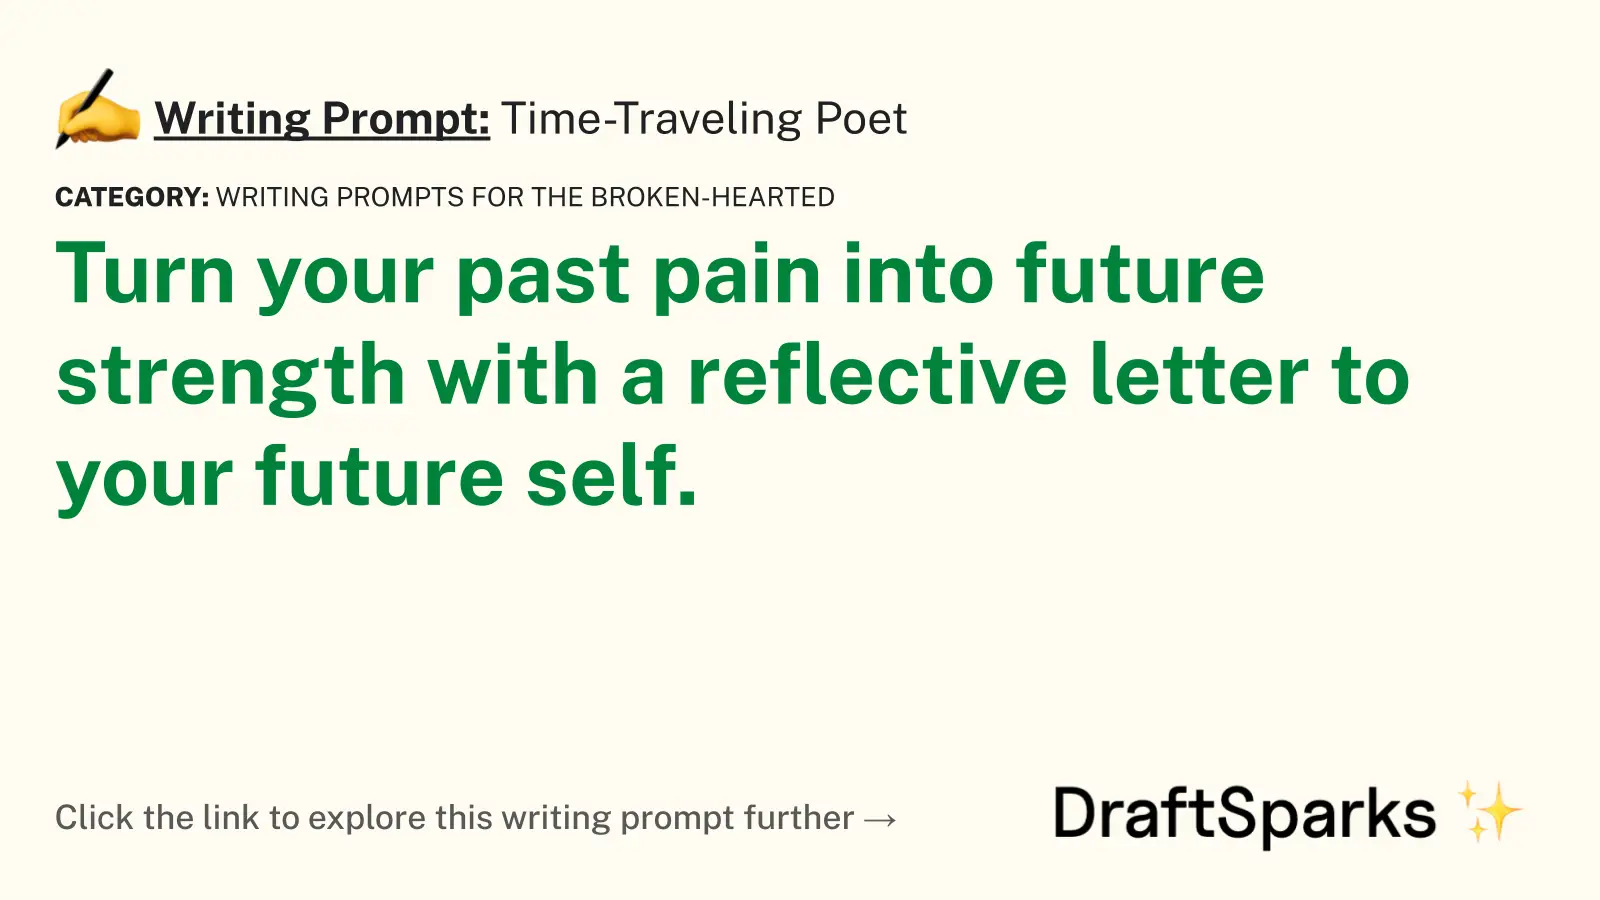 Time-Traveling Poet